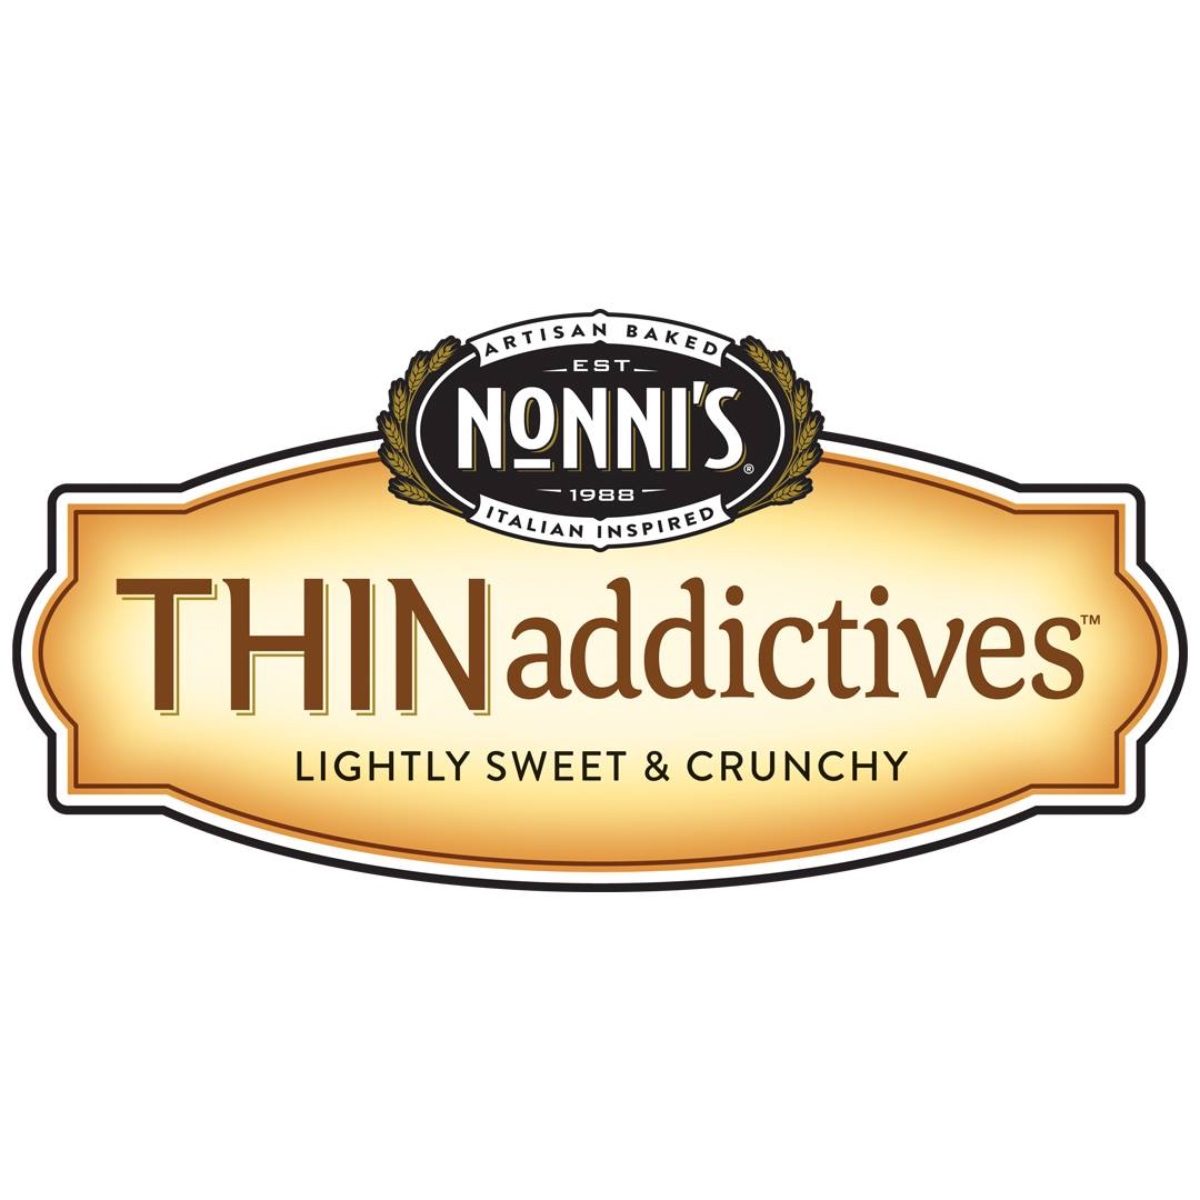 <p><strong><a class="SWhtmlLink" href="http://nonnis.com" rel="noopener">Nonni's Foods</a>, Tulsa</strong></p> <p>The leading brand of biscotti in America is Nonni's Foods. You may also know them as their market name, La Dolce Vita or THINaddictives. Since they're made without artificial preservatives or flavors and quality ingredients, including real fruit, they make a perfect snack.</p>